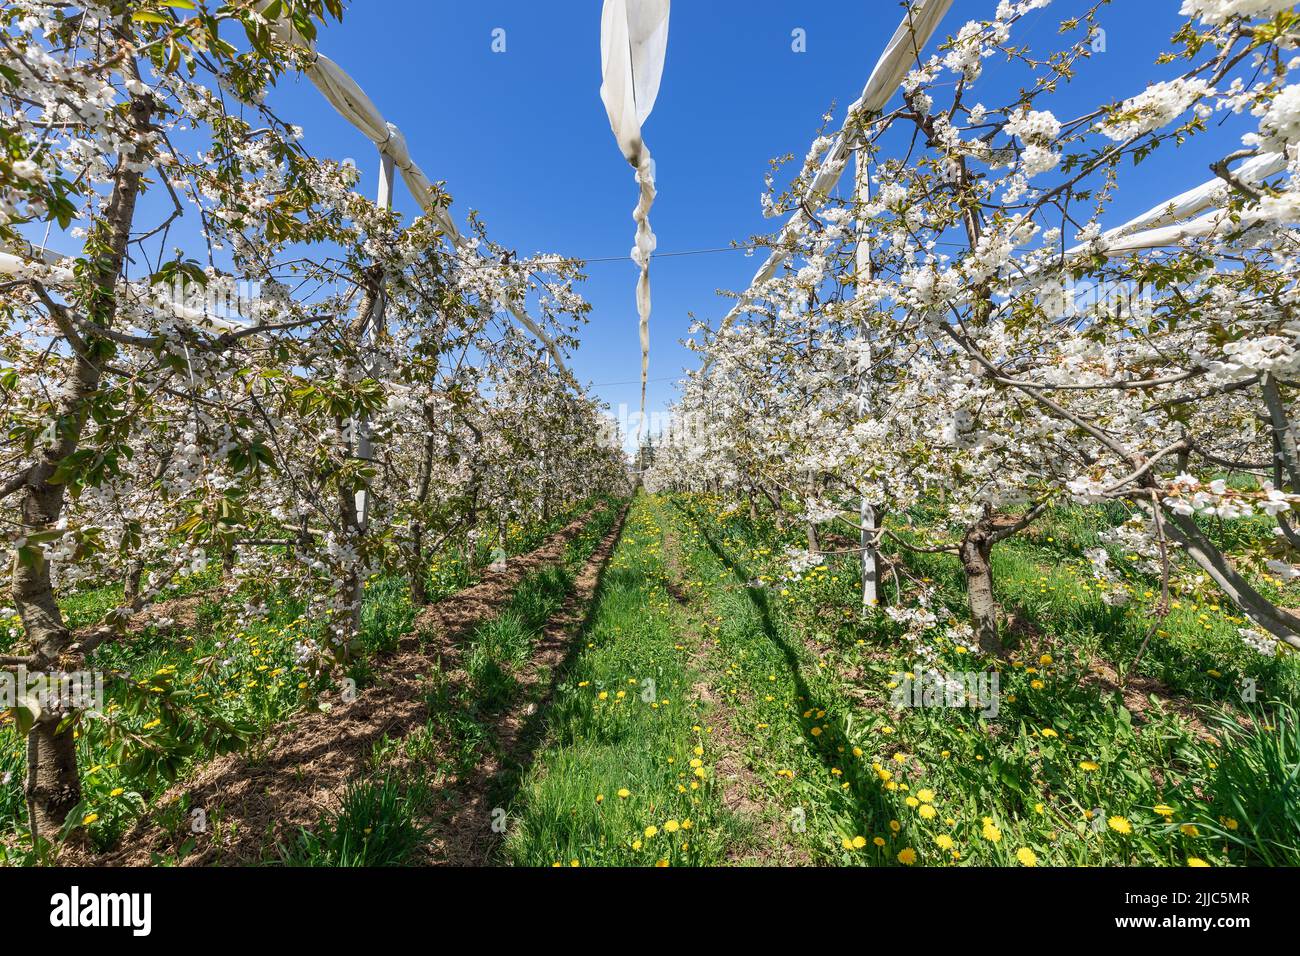 Blooming young apple bushes on green grass with yellow dandelions, open from under a canopy towards the spring sun and blue sky, Val di Non, Trentino Stock Photo